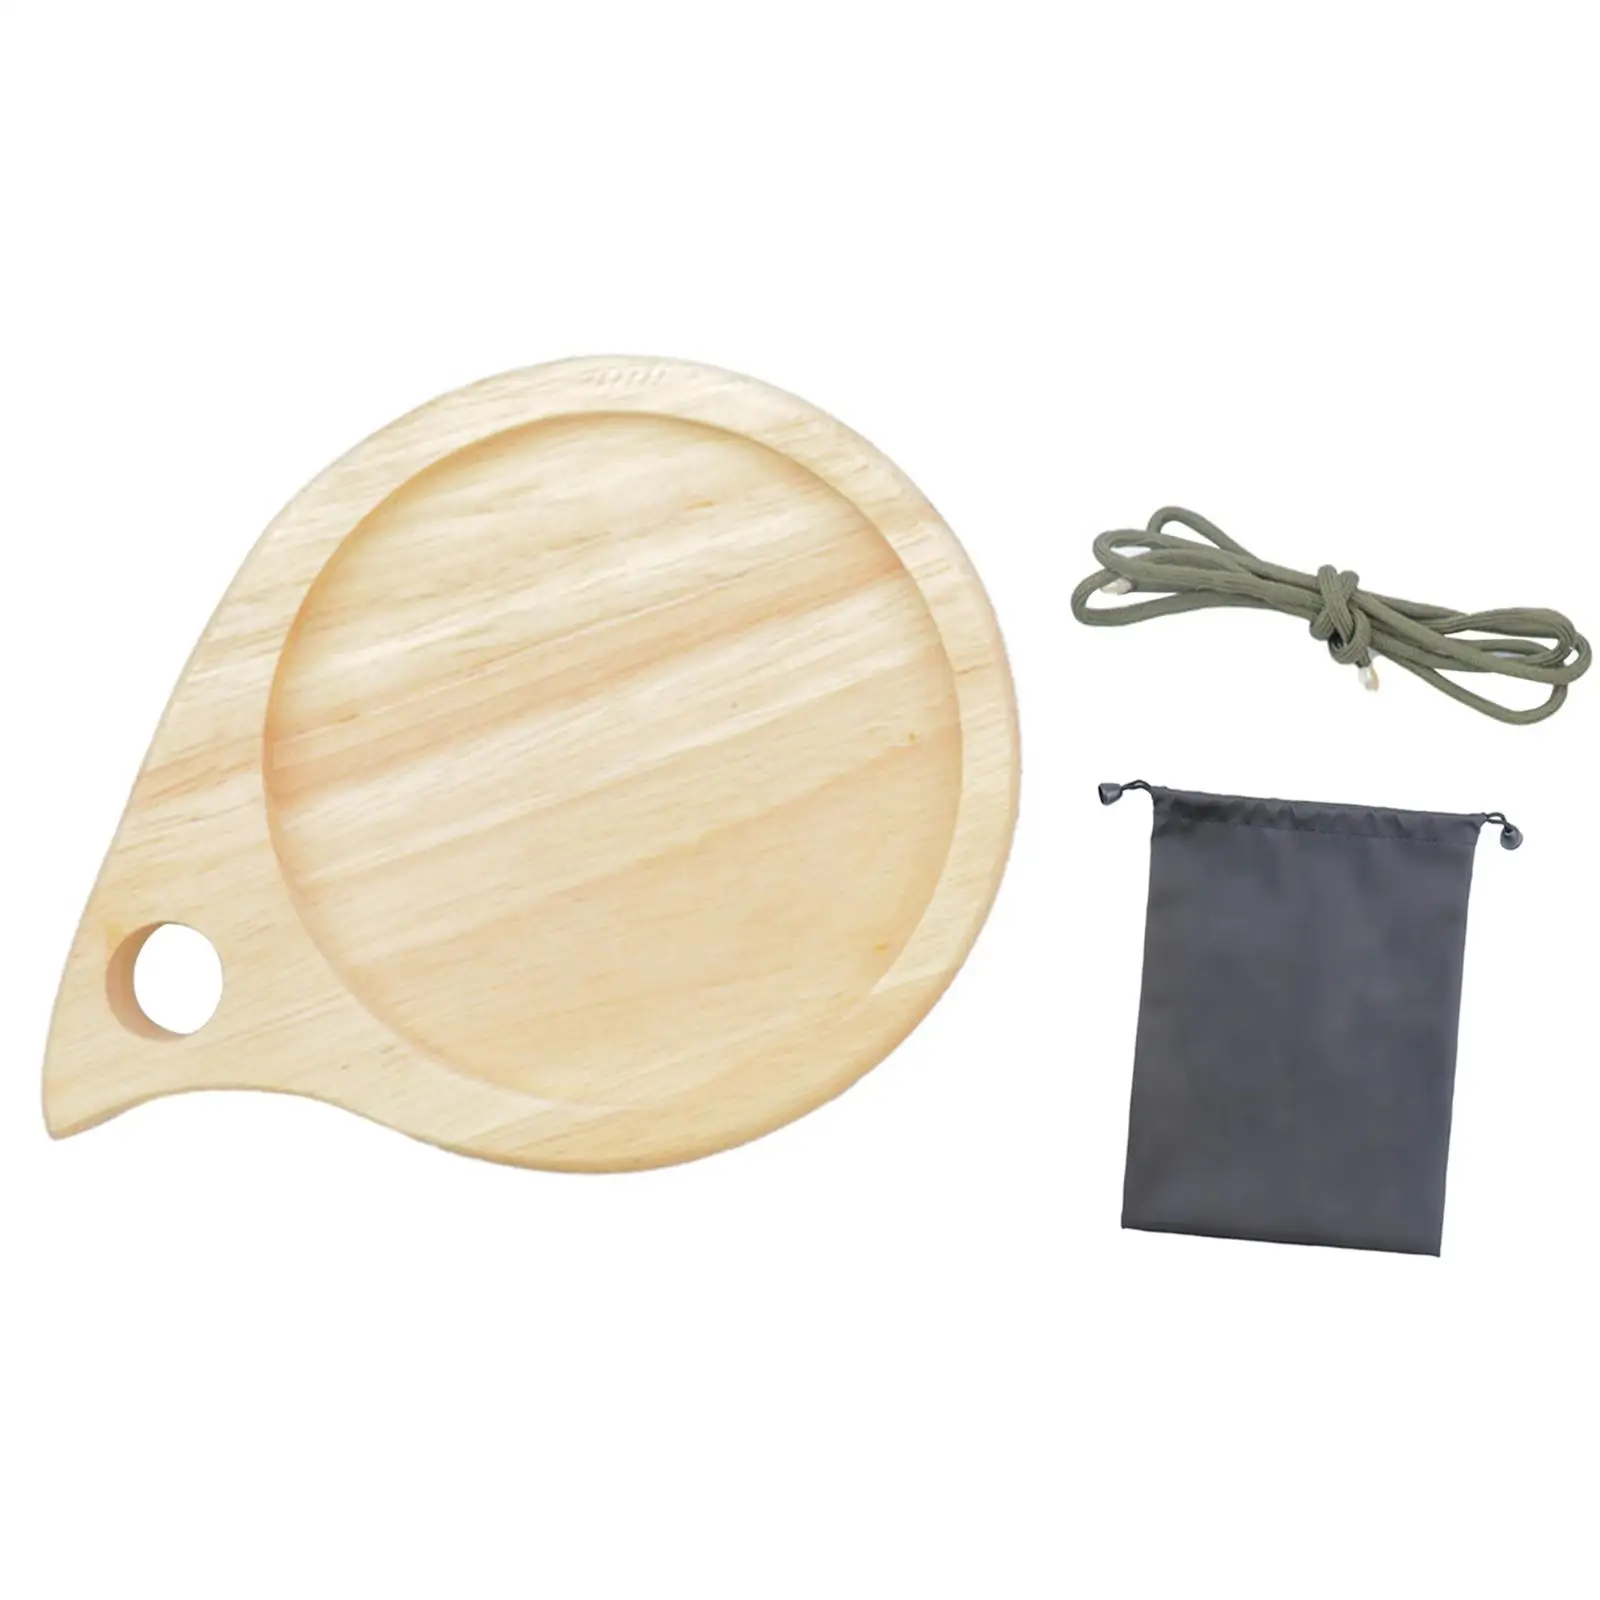 Rubber Wooden Cutting Board Chopping Board with Handle for Kitchen Home